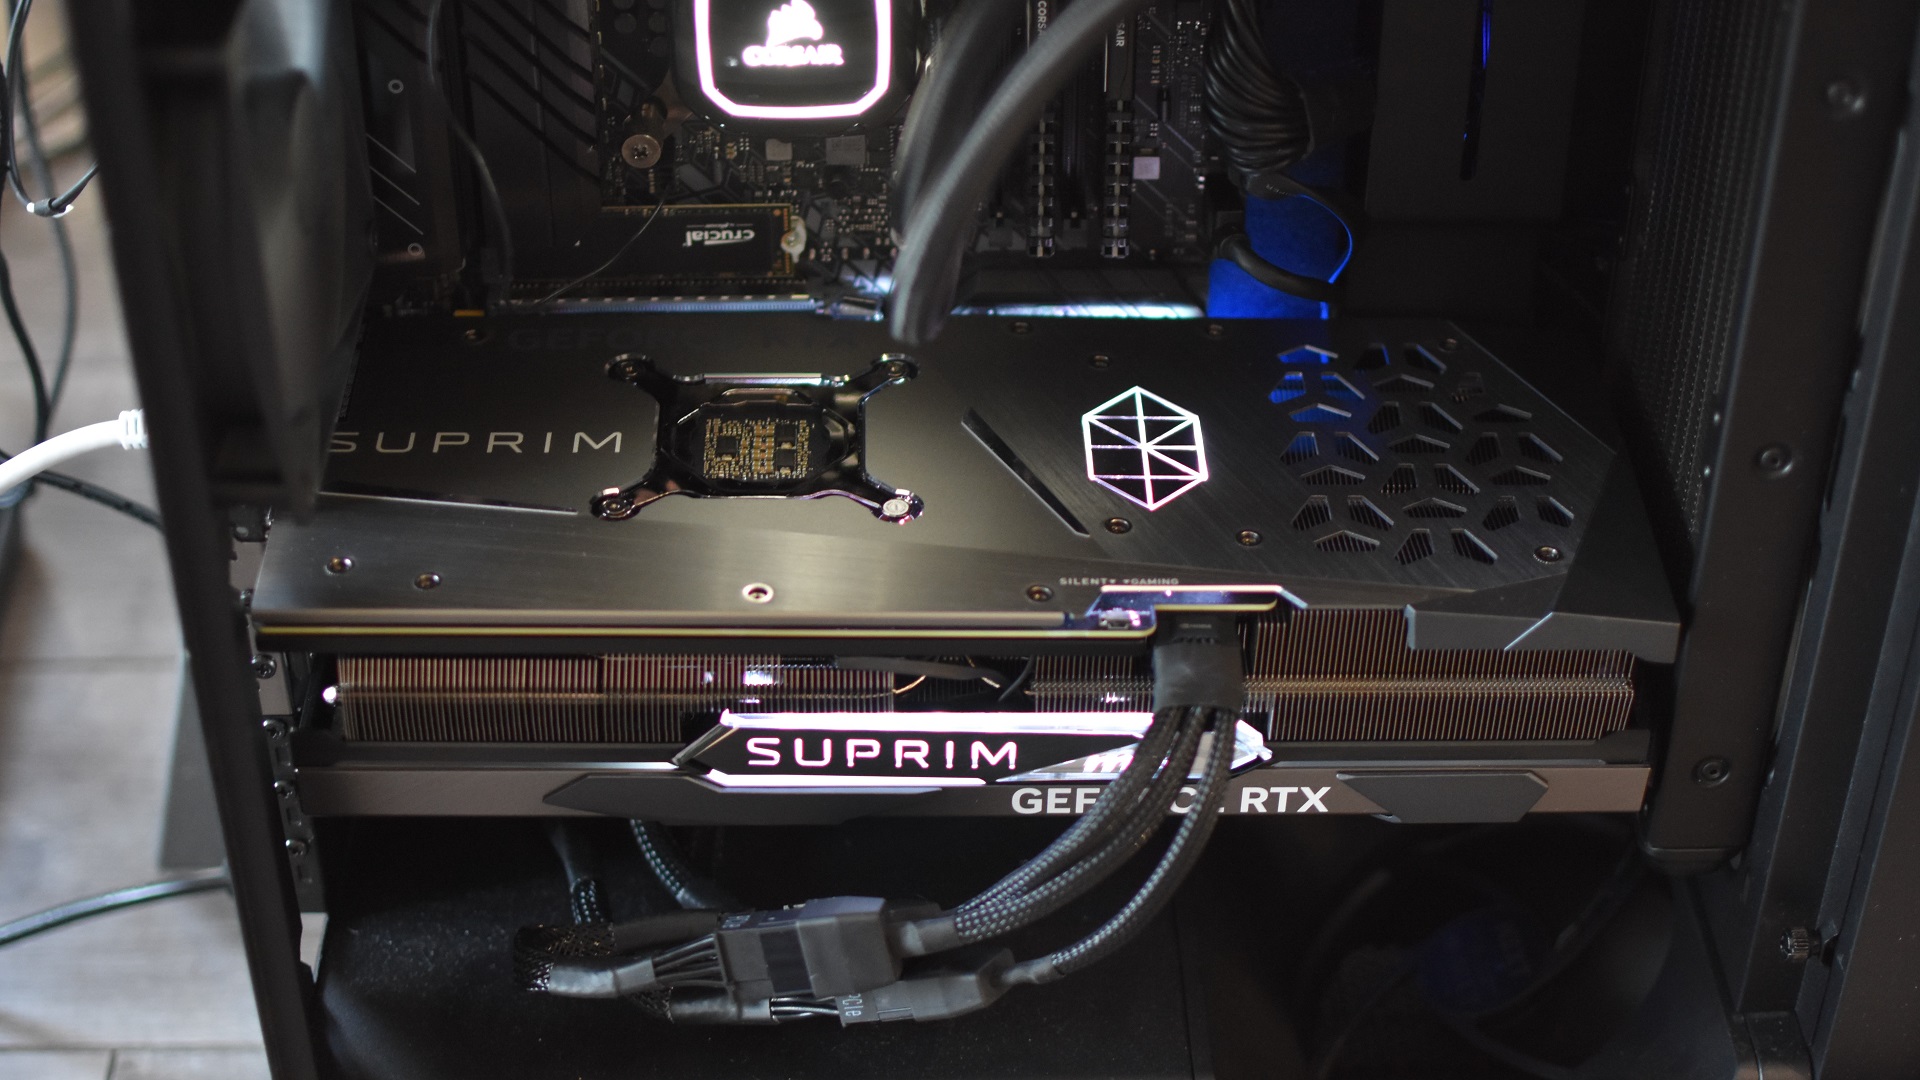 The MSI GeForce RTX 4070 Ti Suprim X 12G graphics card installed and running inside a PC.